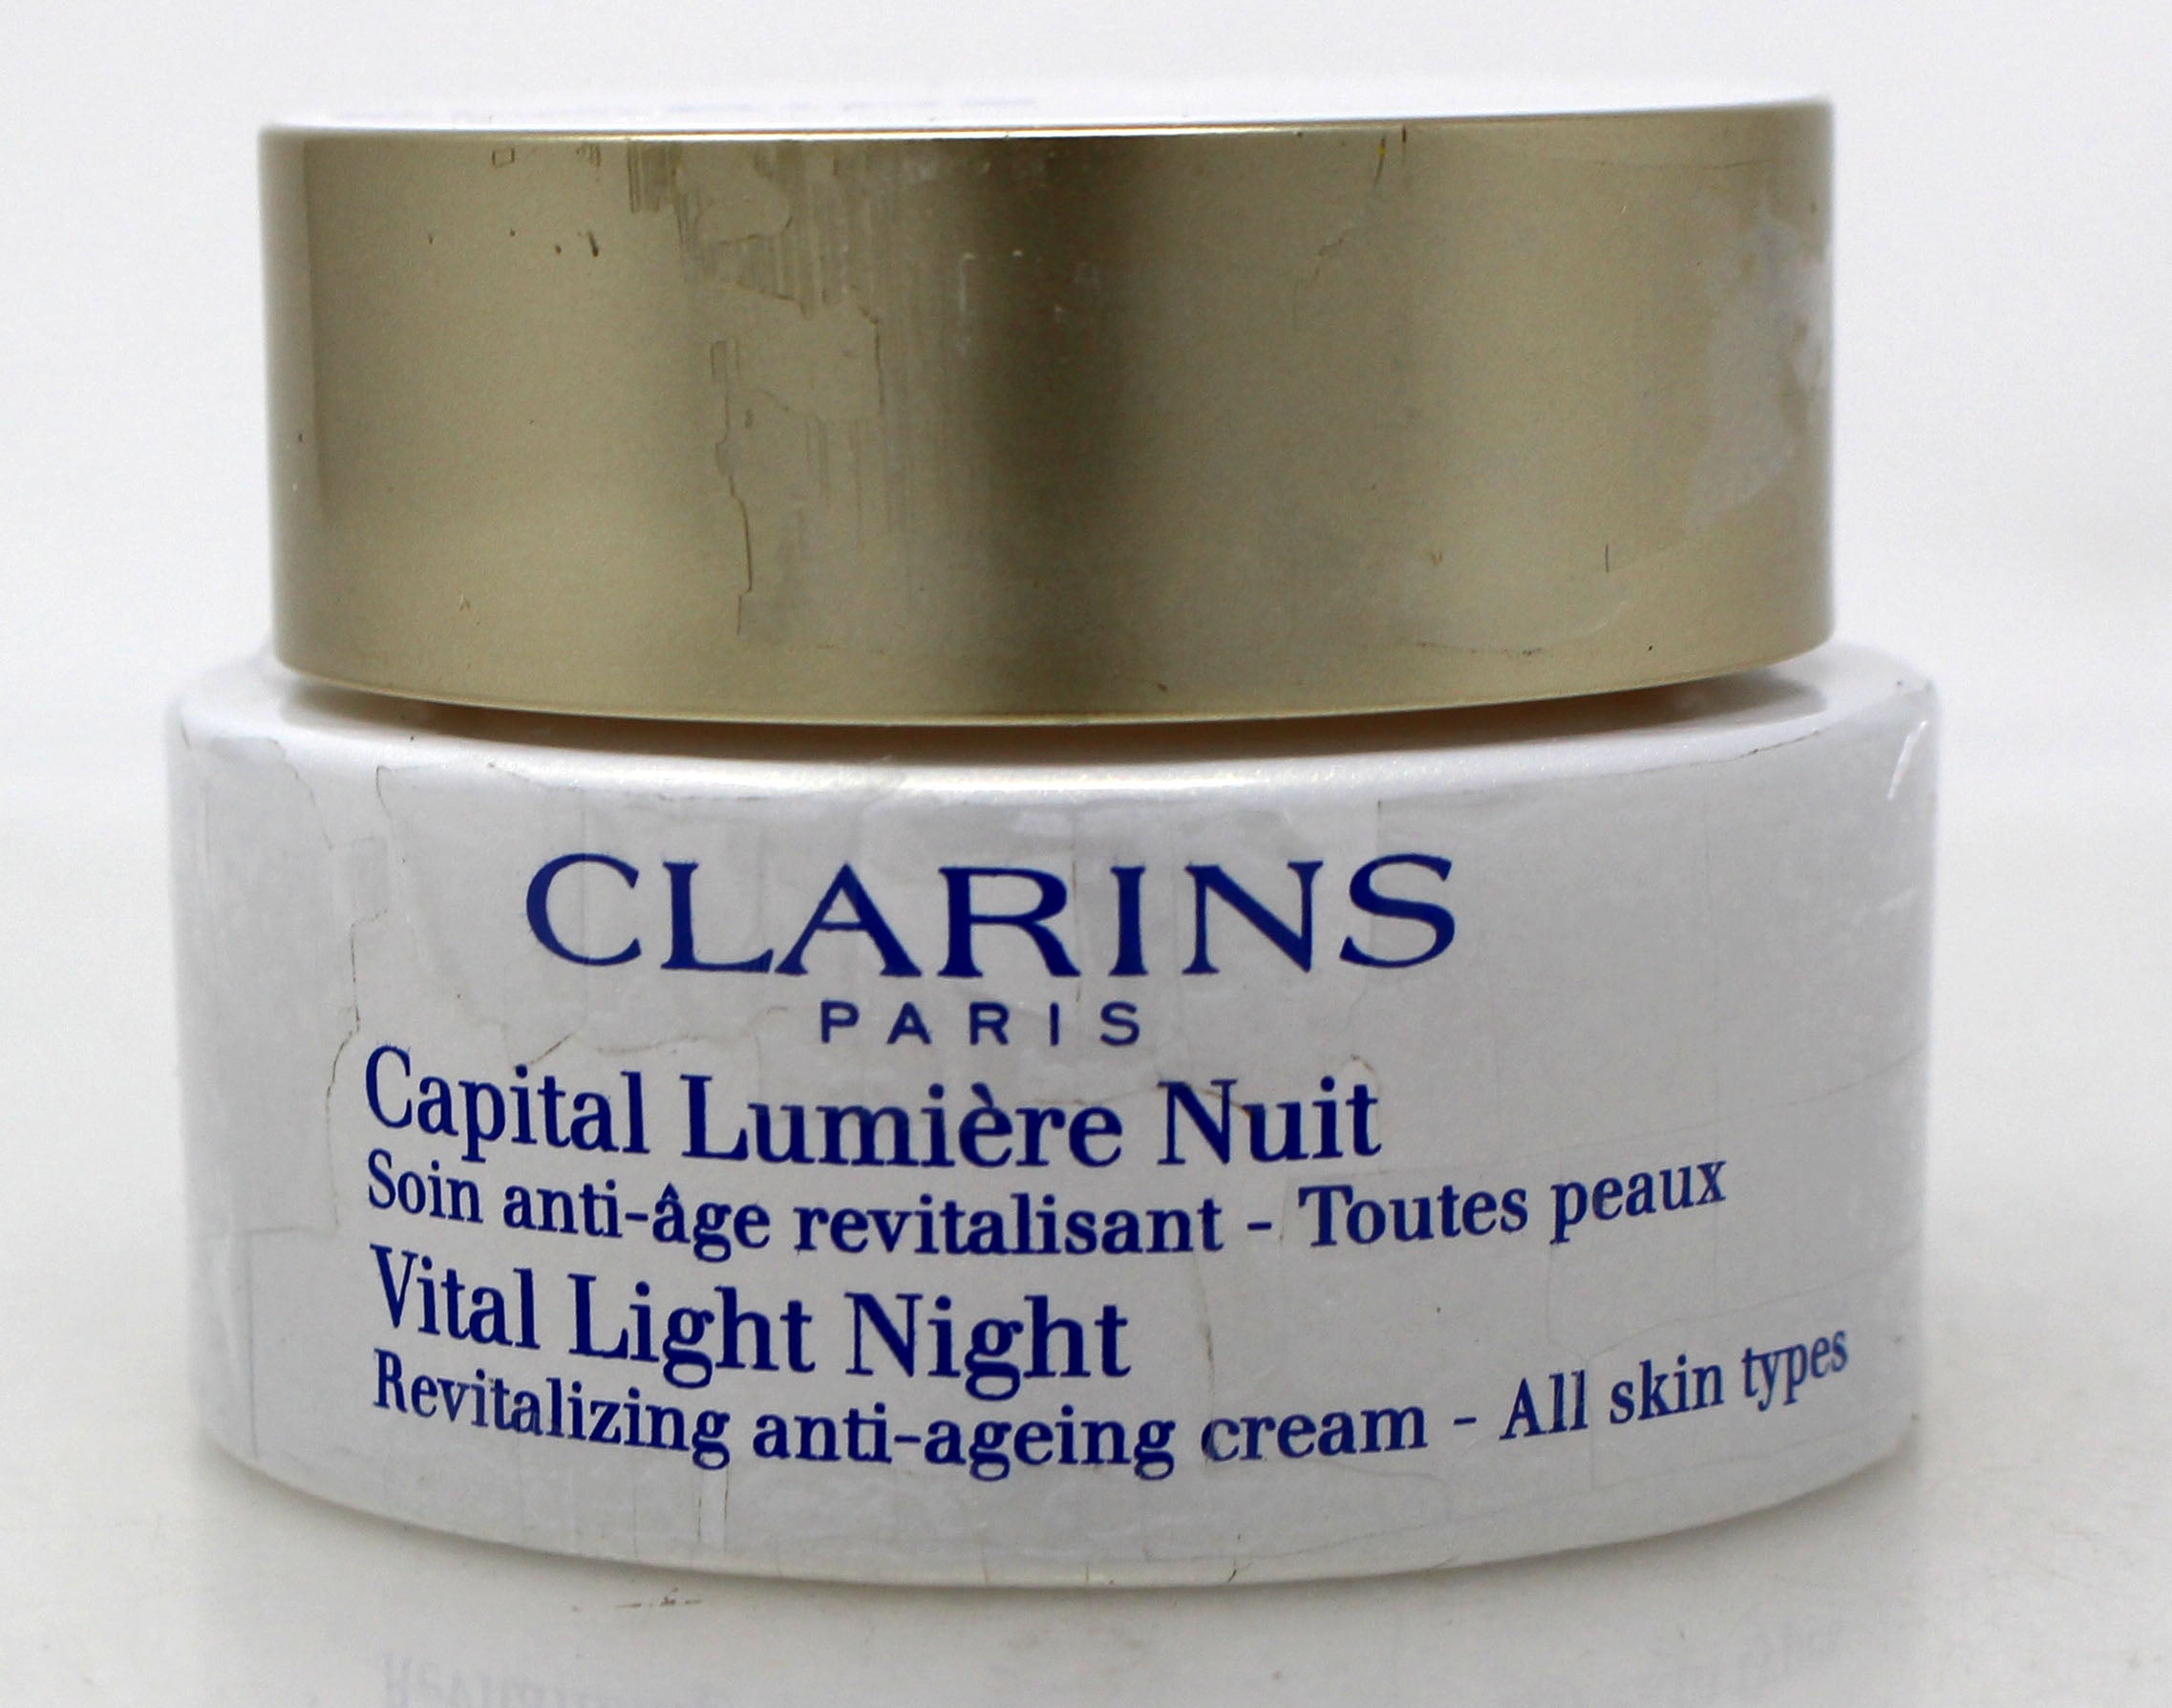 Clarins Vital Light Night Revitalizing Anti-Ageing Cream 1.7 Ounce (Packaing Distressed)